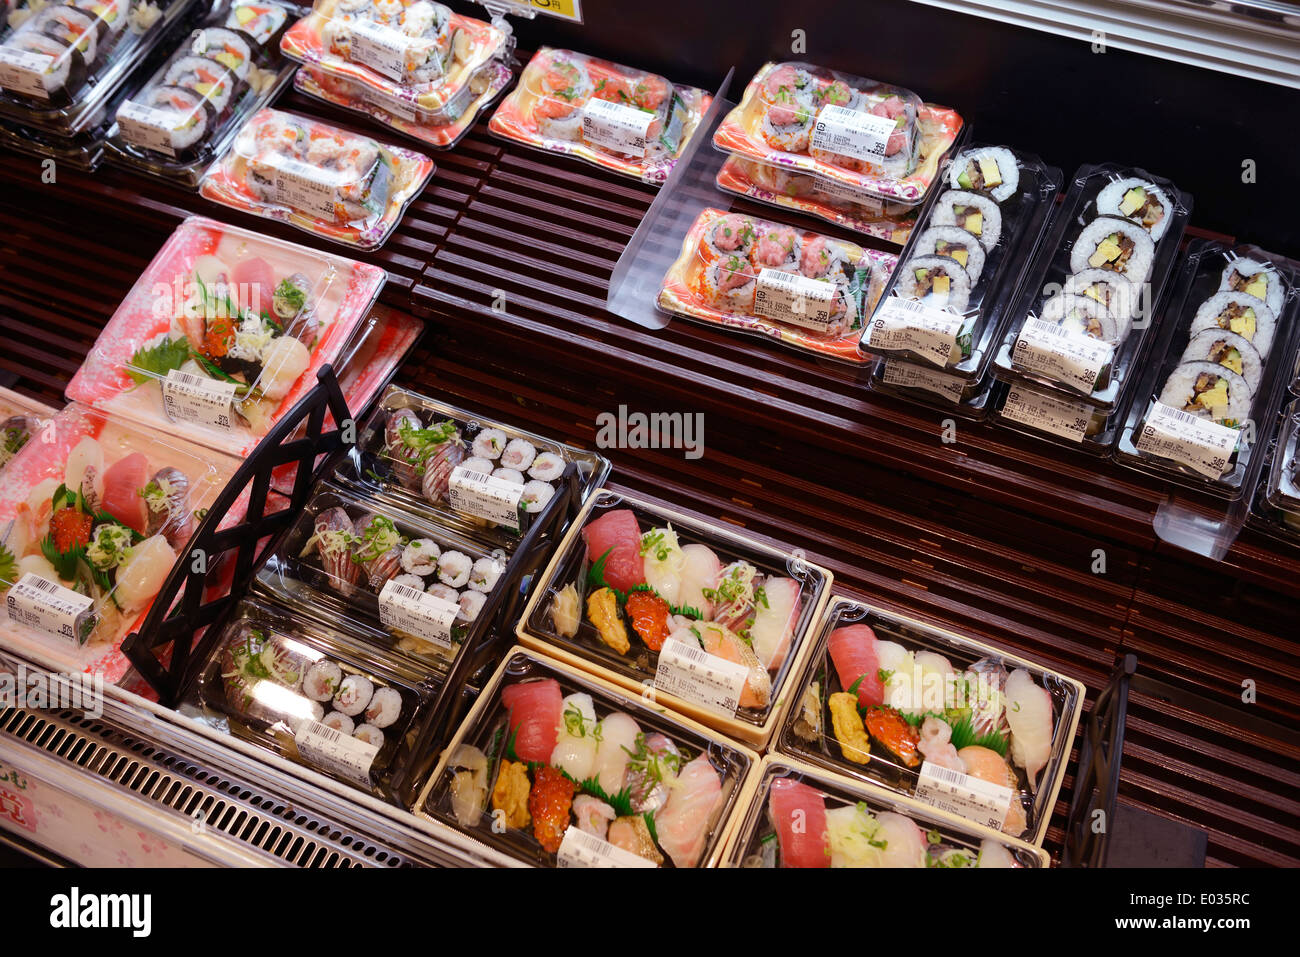 Packaged sushi rolls, prepared food on display in a Japanese supermarket. Tokyo, Japan. Stock Photo